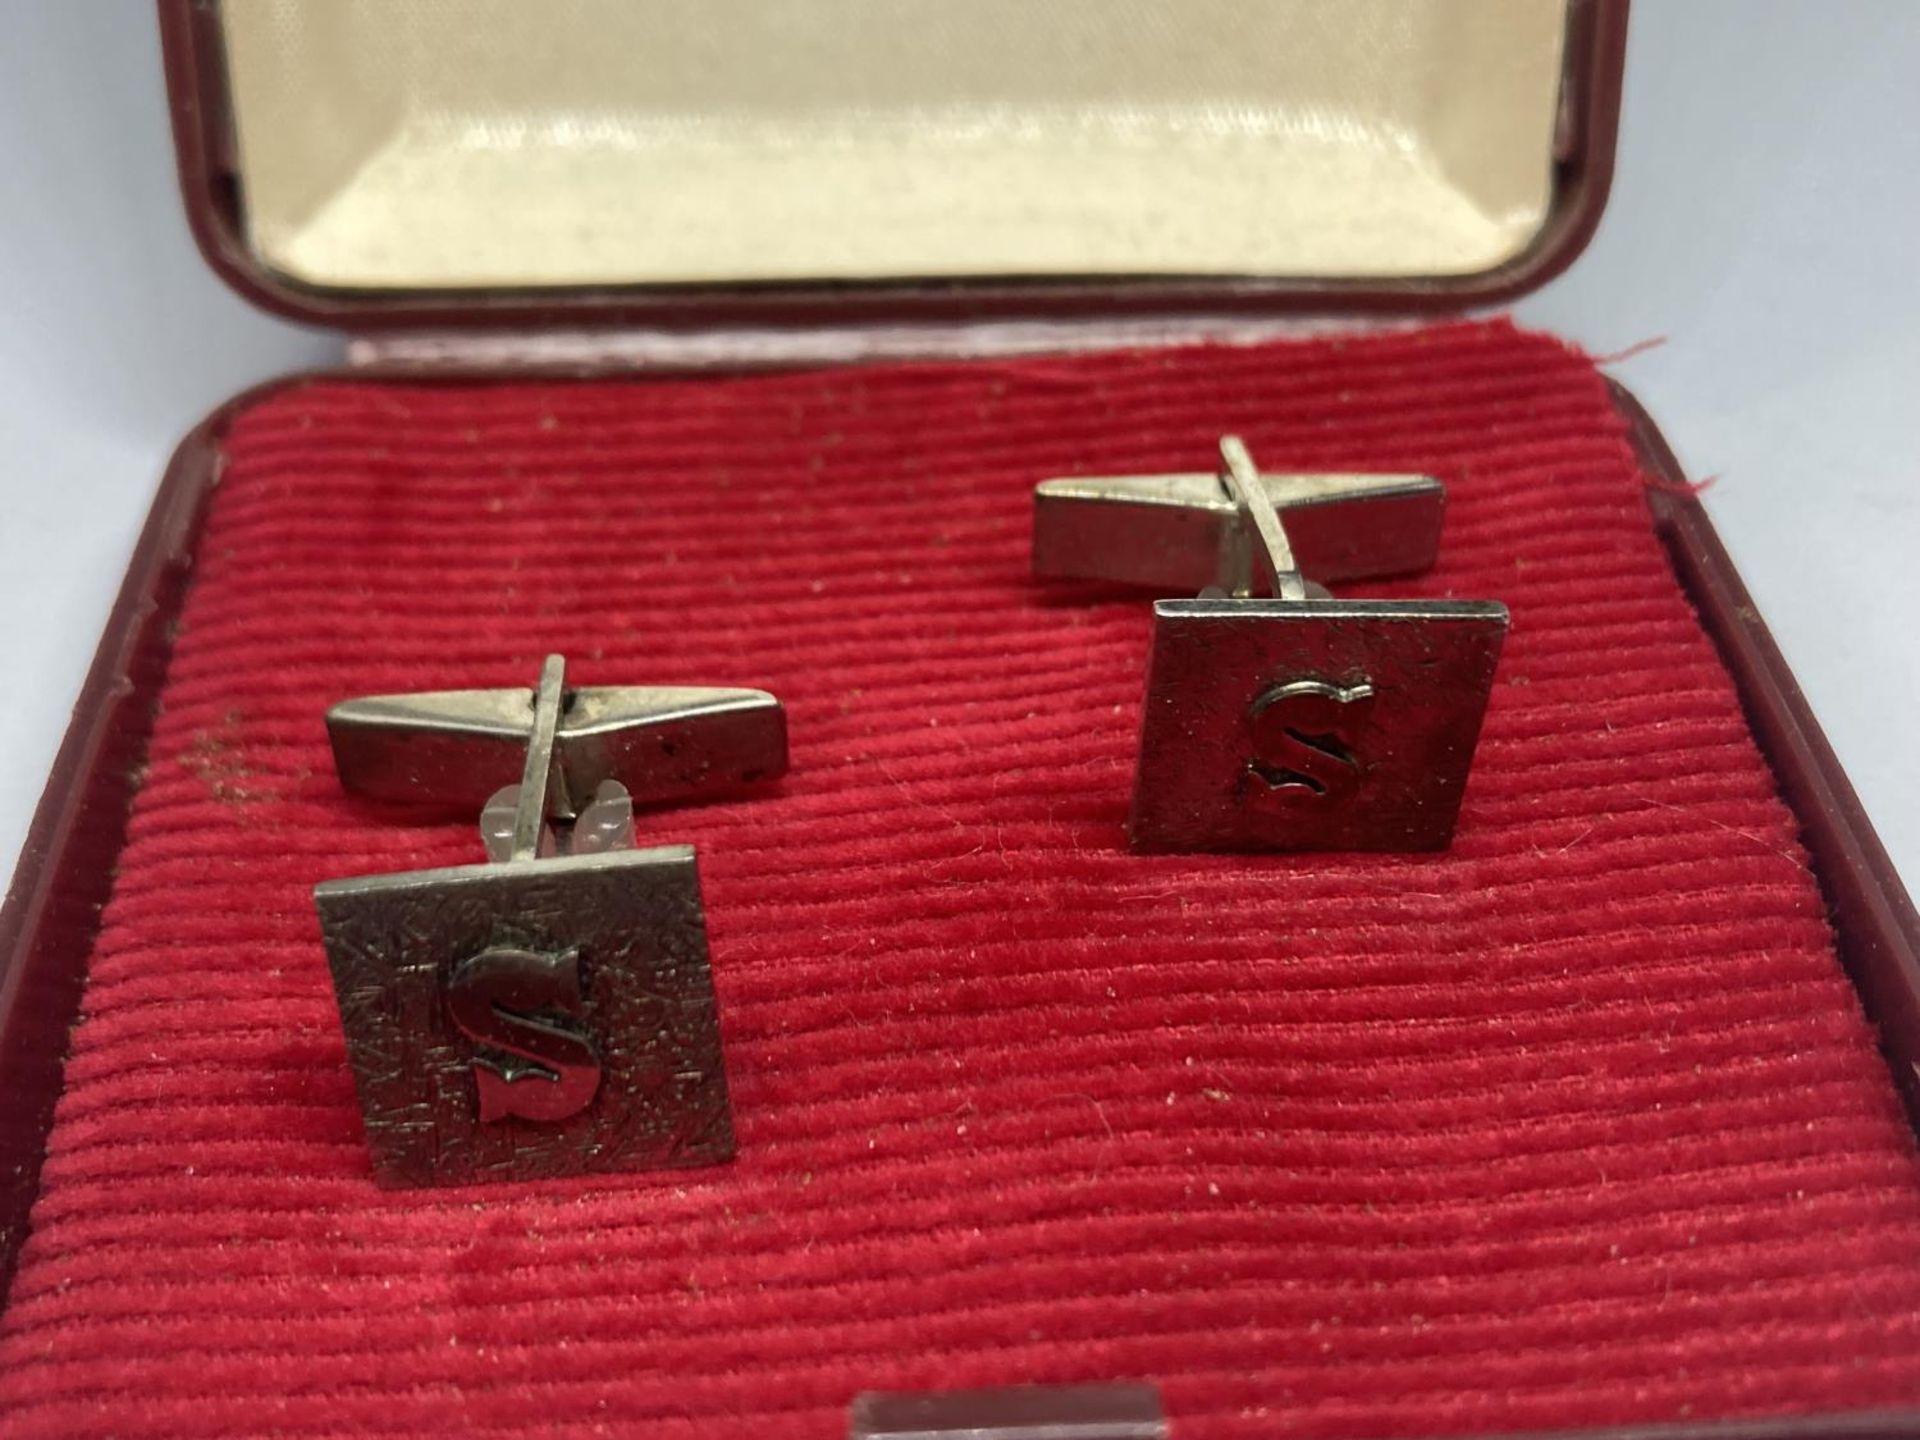 A PAIR OF SILVER CUFFLINKS IN A PRESENTATION BOX - Image 2 of 3